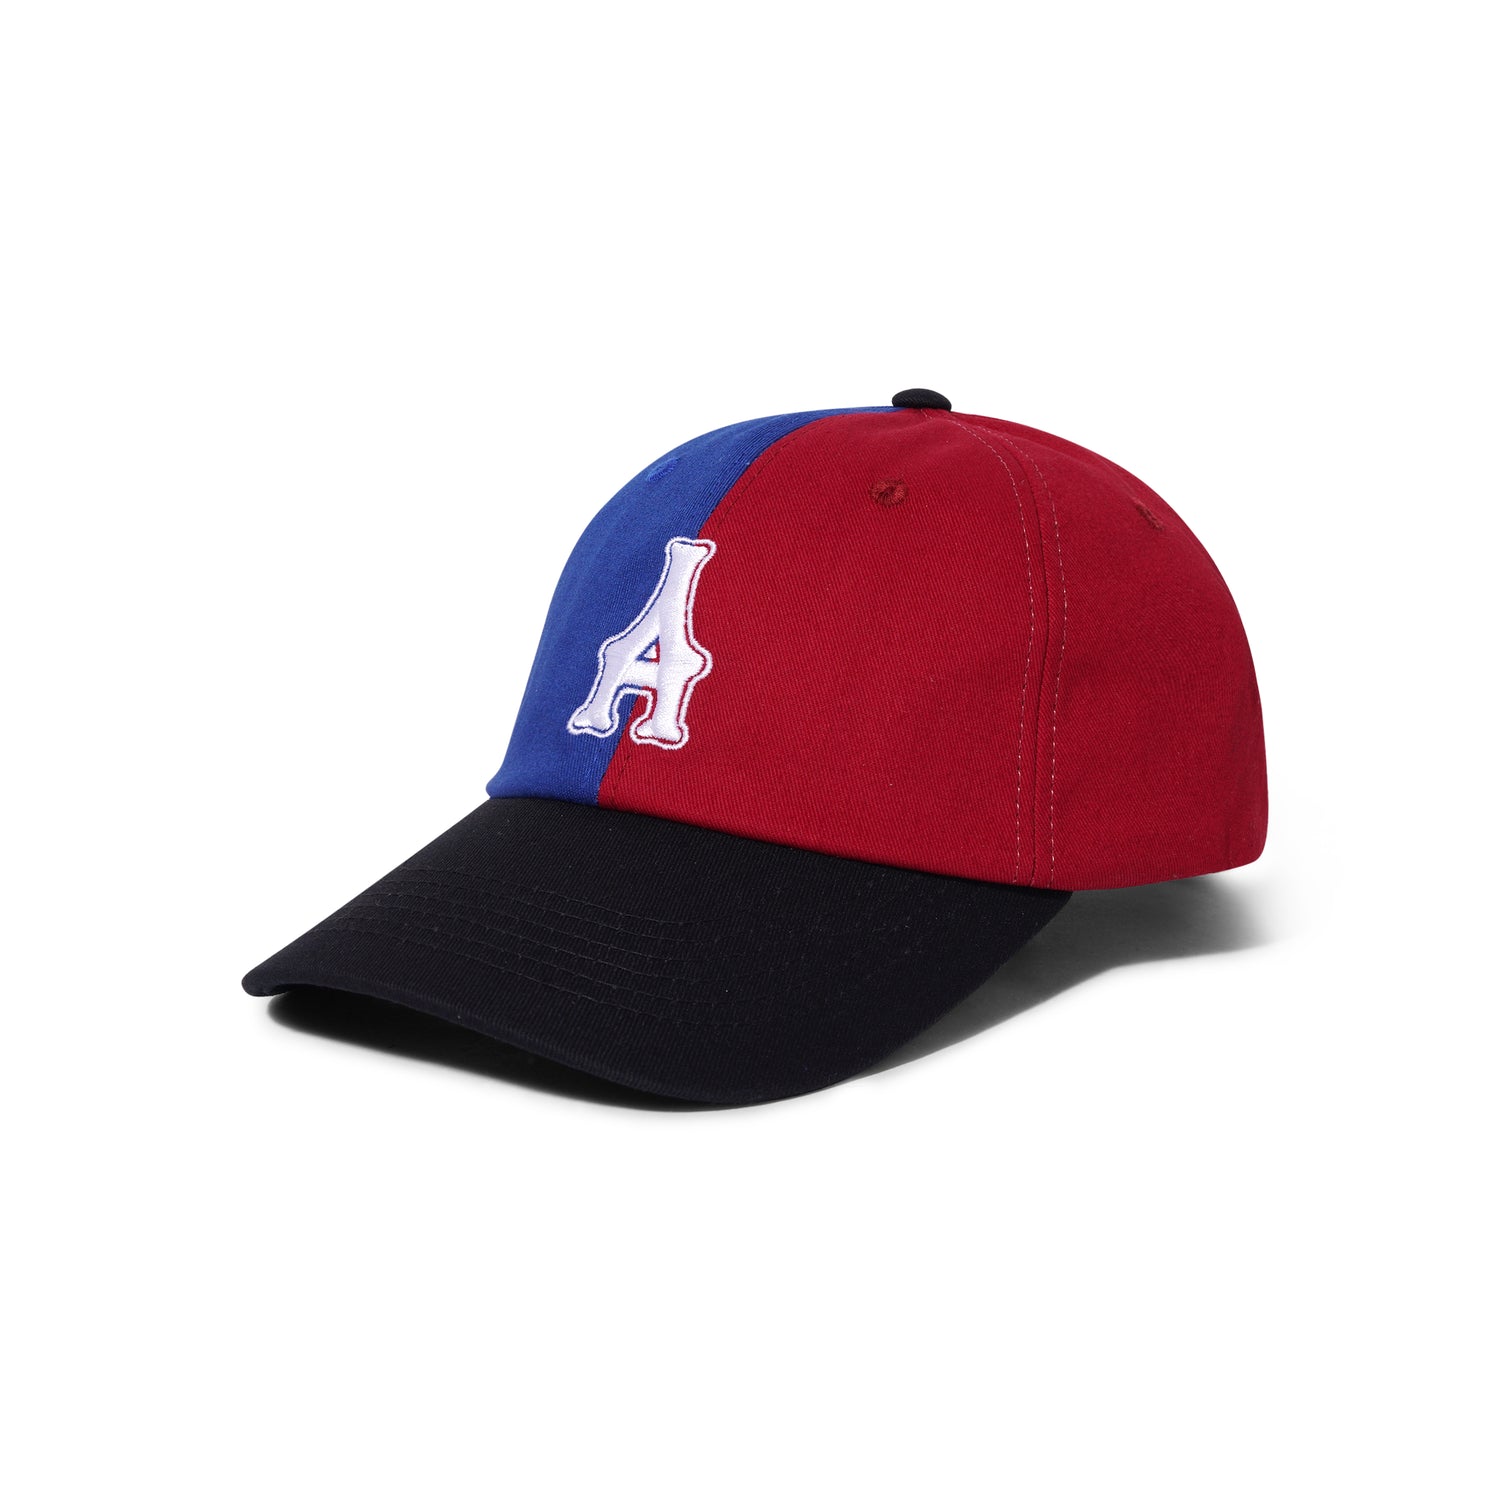 A Hat, Black / Blue / Red / White